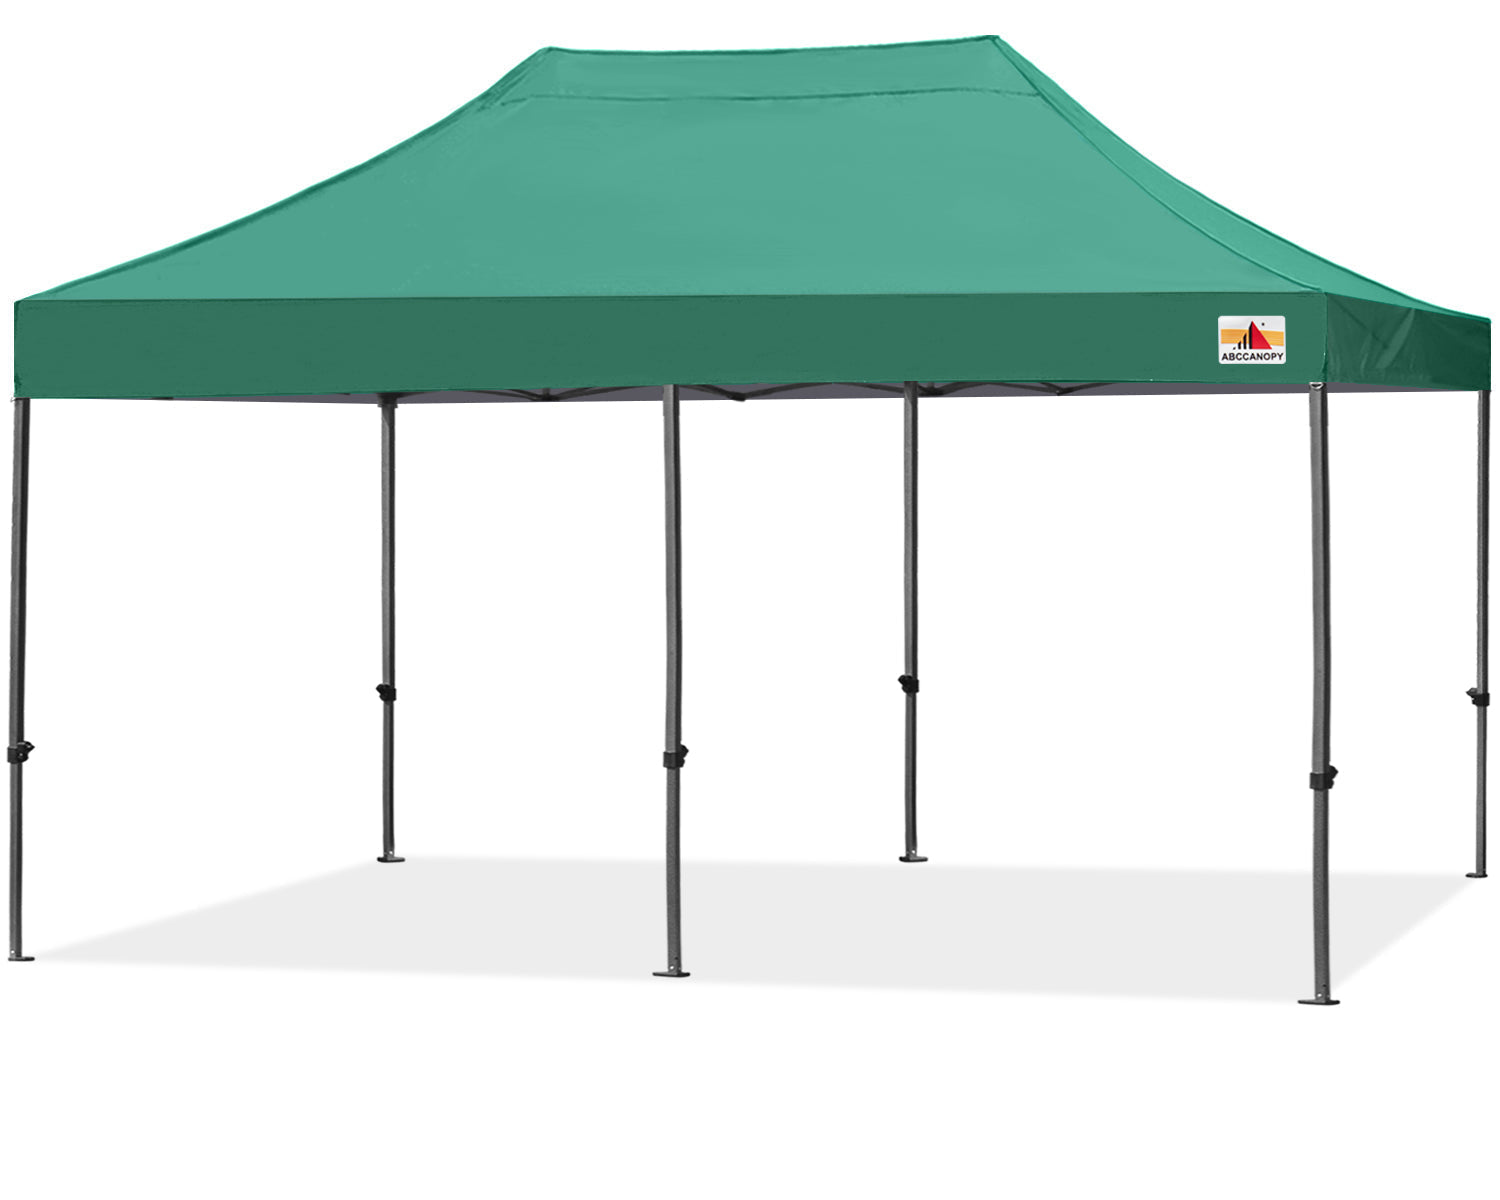 S1 Commercial Durable Easy Pop Up Canopy Tent 10x20 Instant Shelter